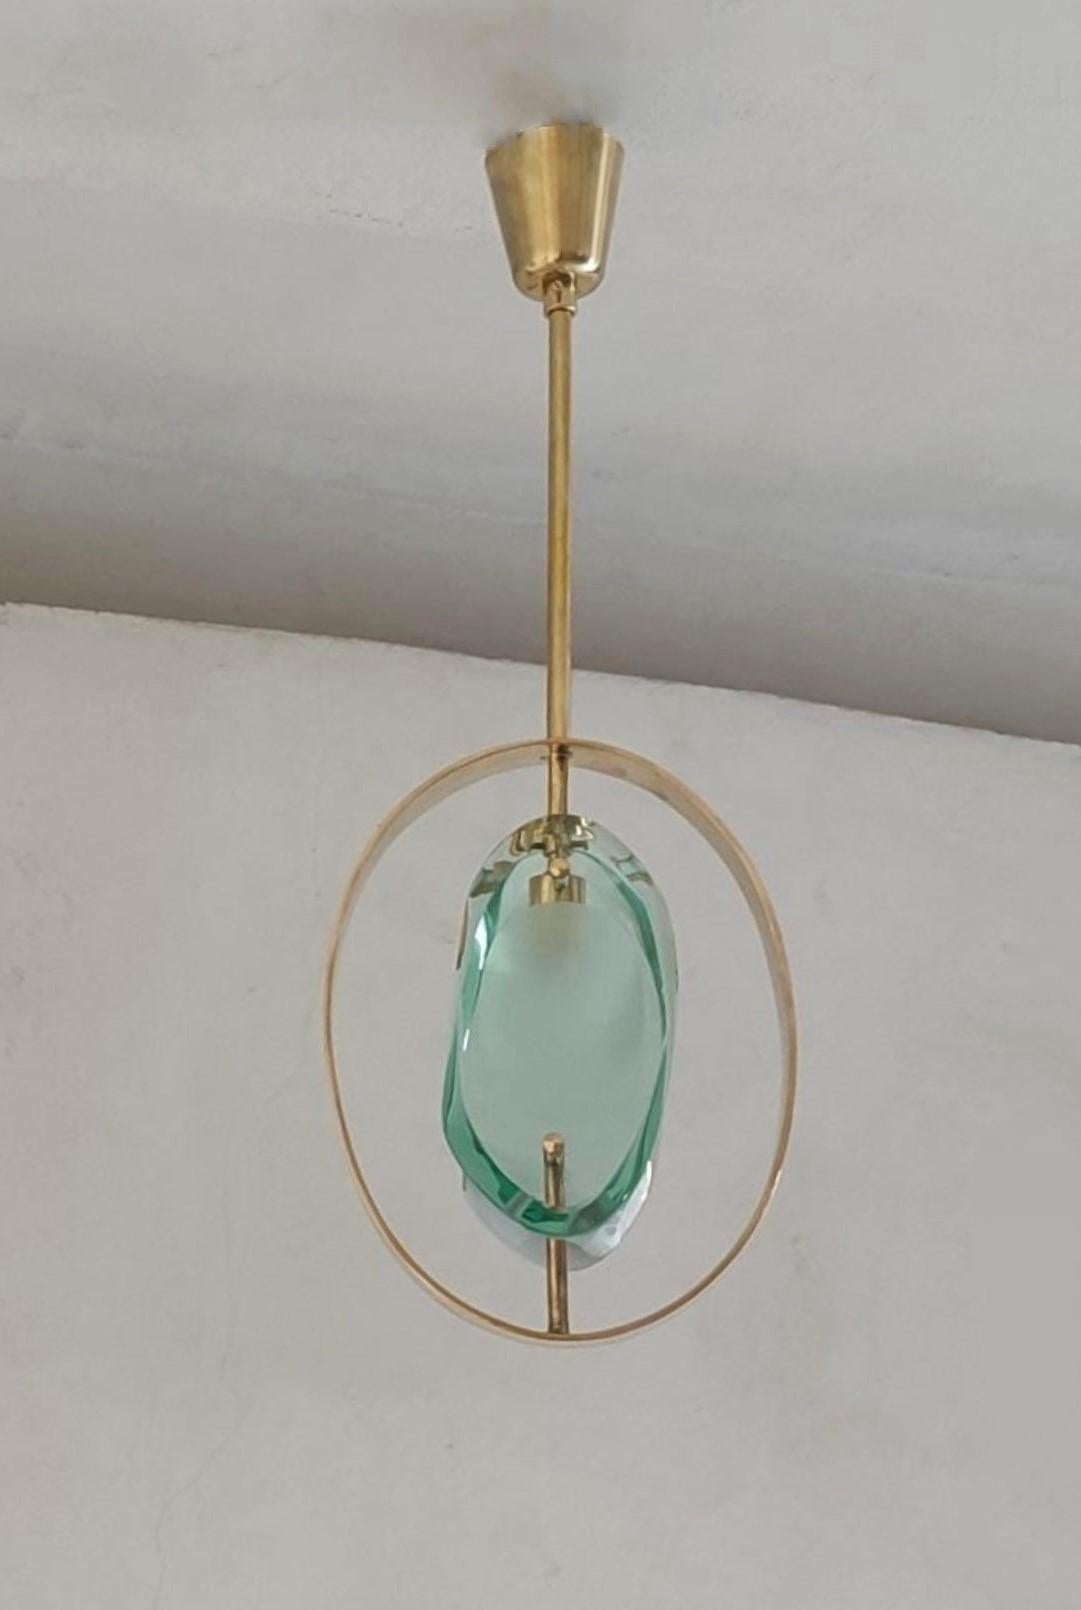 An iconic design pendant by Max Ingrand for Fontana Arte, Model 1933, Italy, 1961. Organically shaped double lens cut panels of thick profiled polished Murano glass with sandblasted centers fitted within a natural brass ring suspended from brass